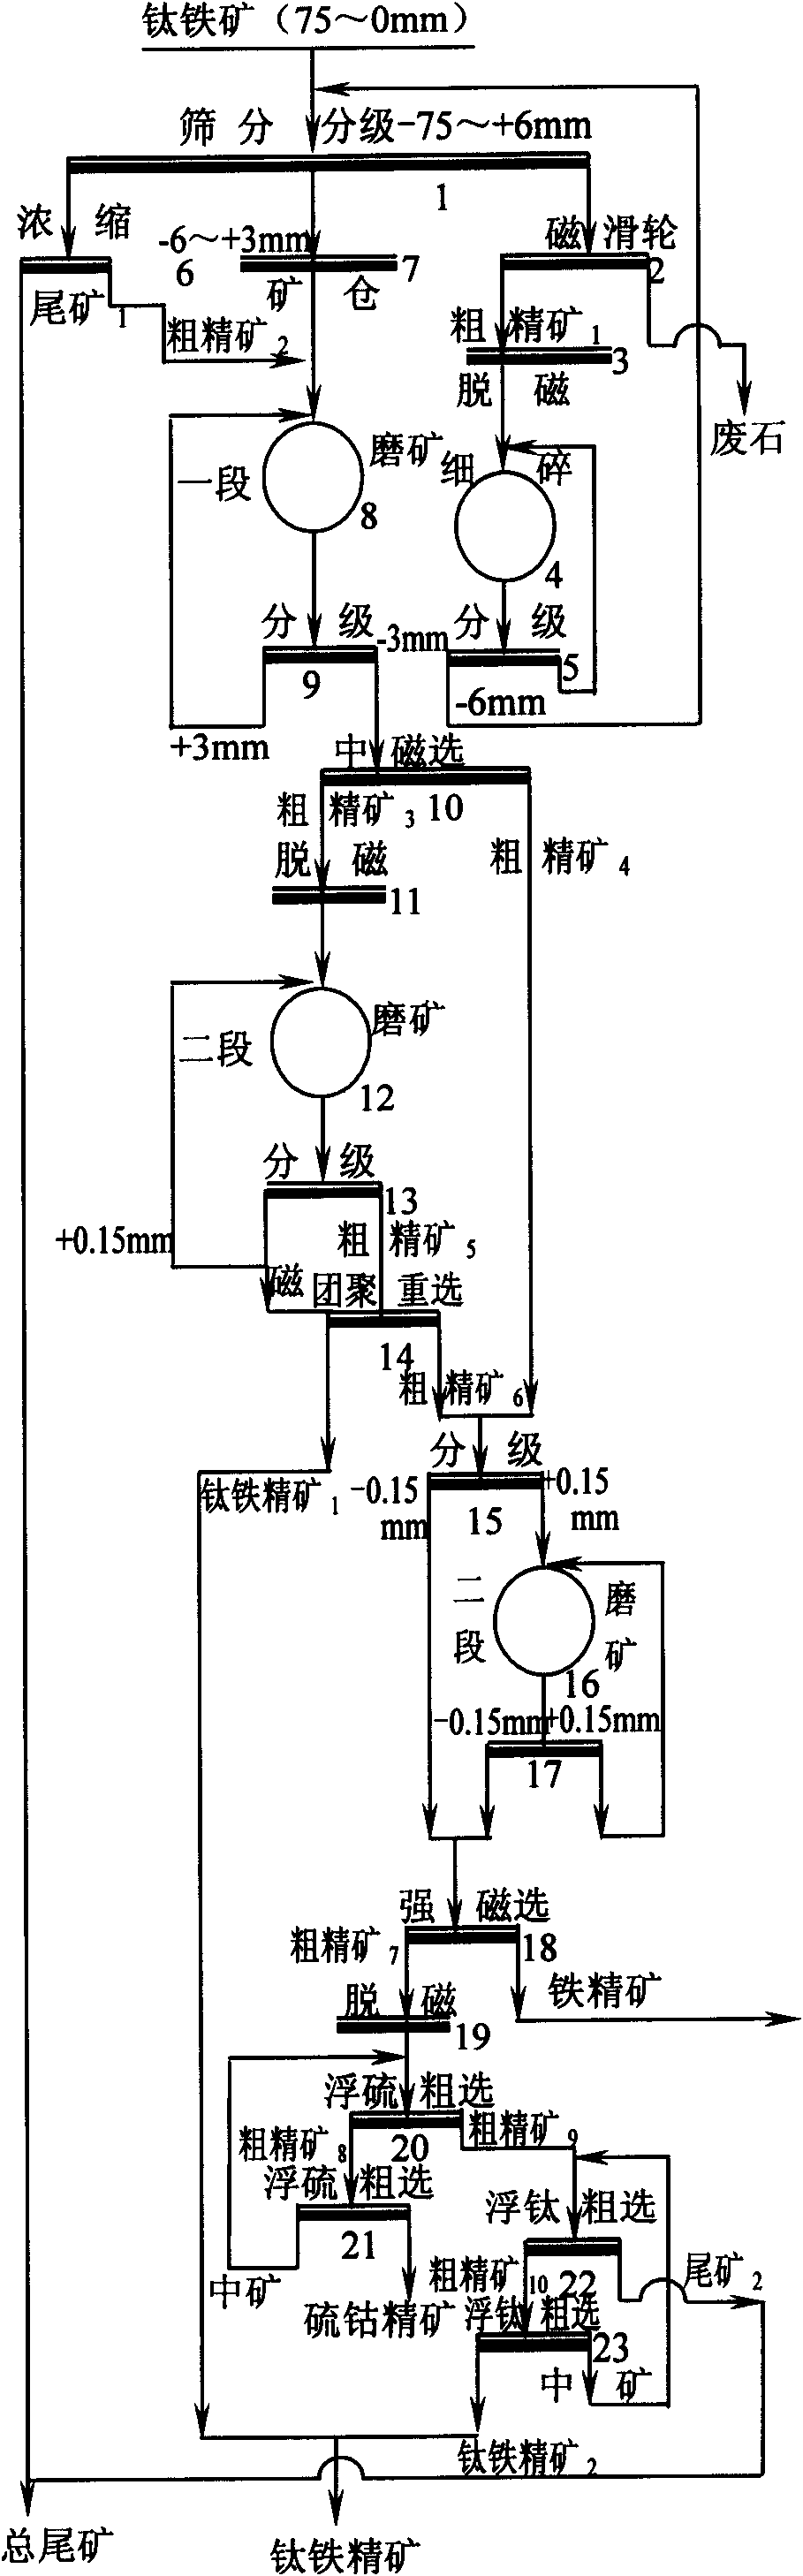 Method for producing titanium and steel products by utilizing titanium and iron ores